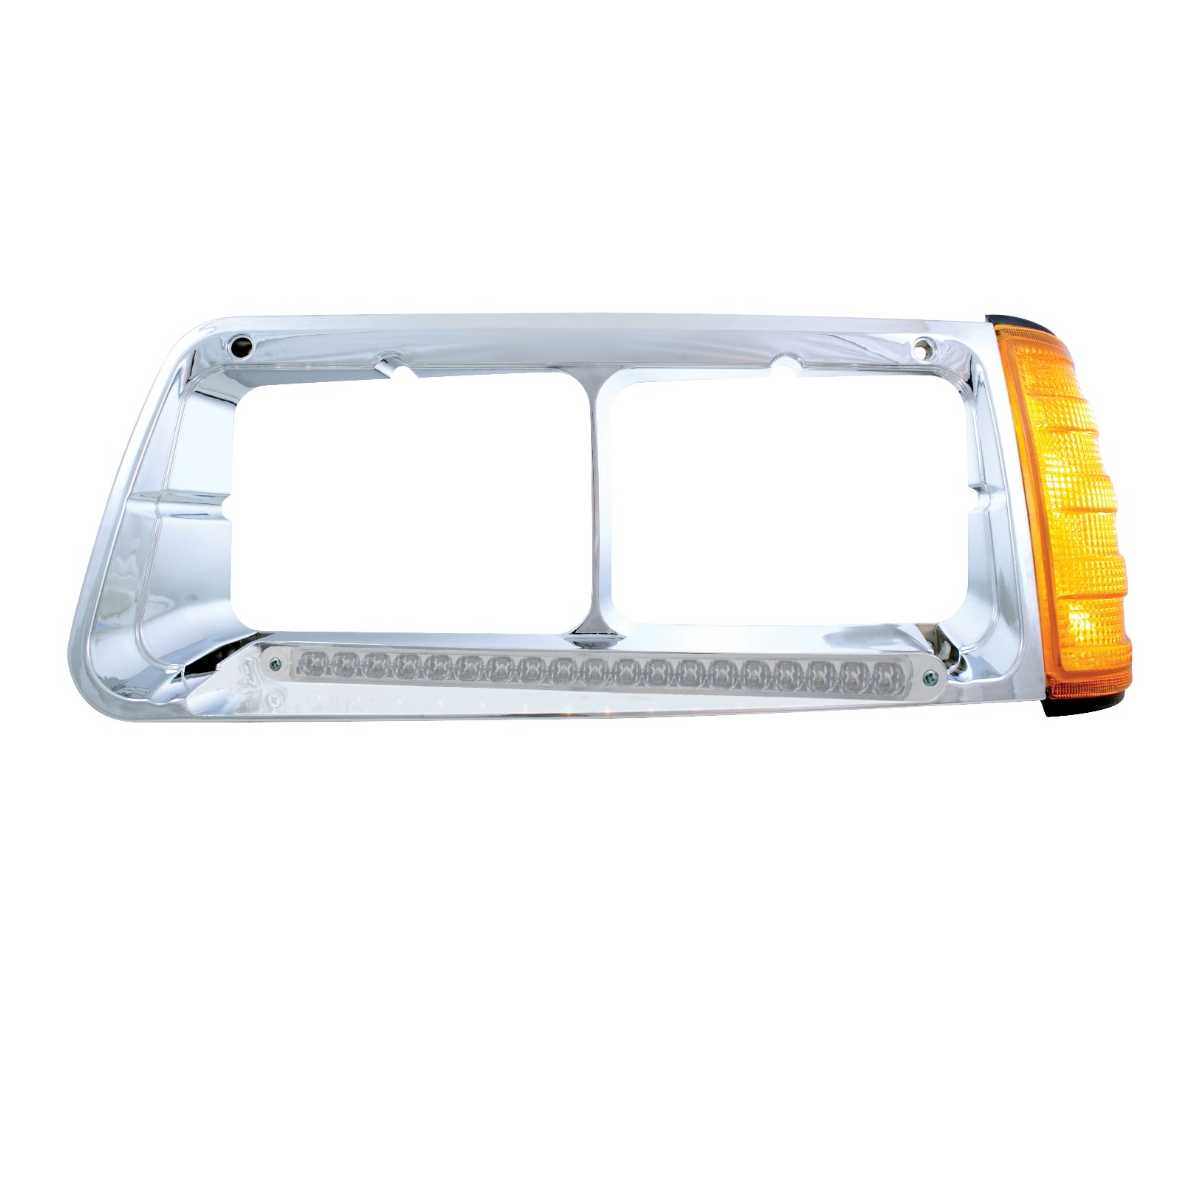 Headlight Bezel for 1989-2009 Freightliner FLD with 19 Amber LED Light Bar and Amber Turn Signal - Clear Lens - Driver Side